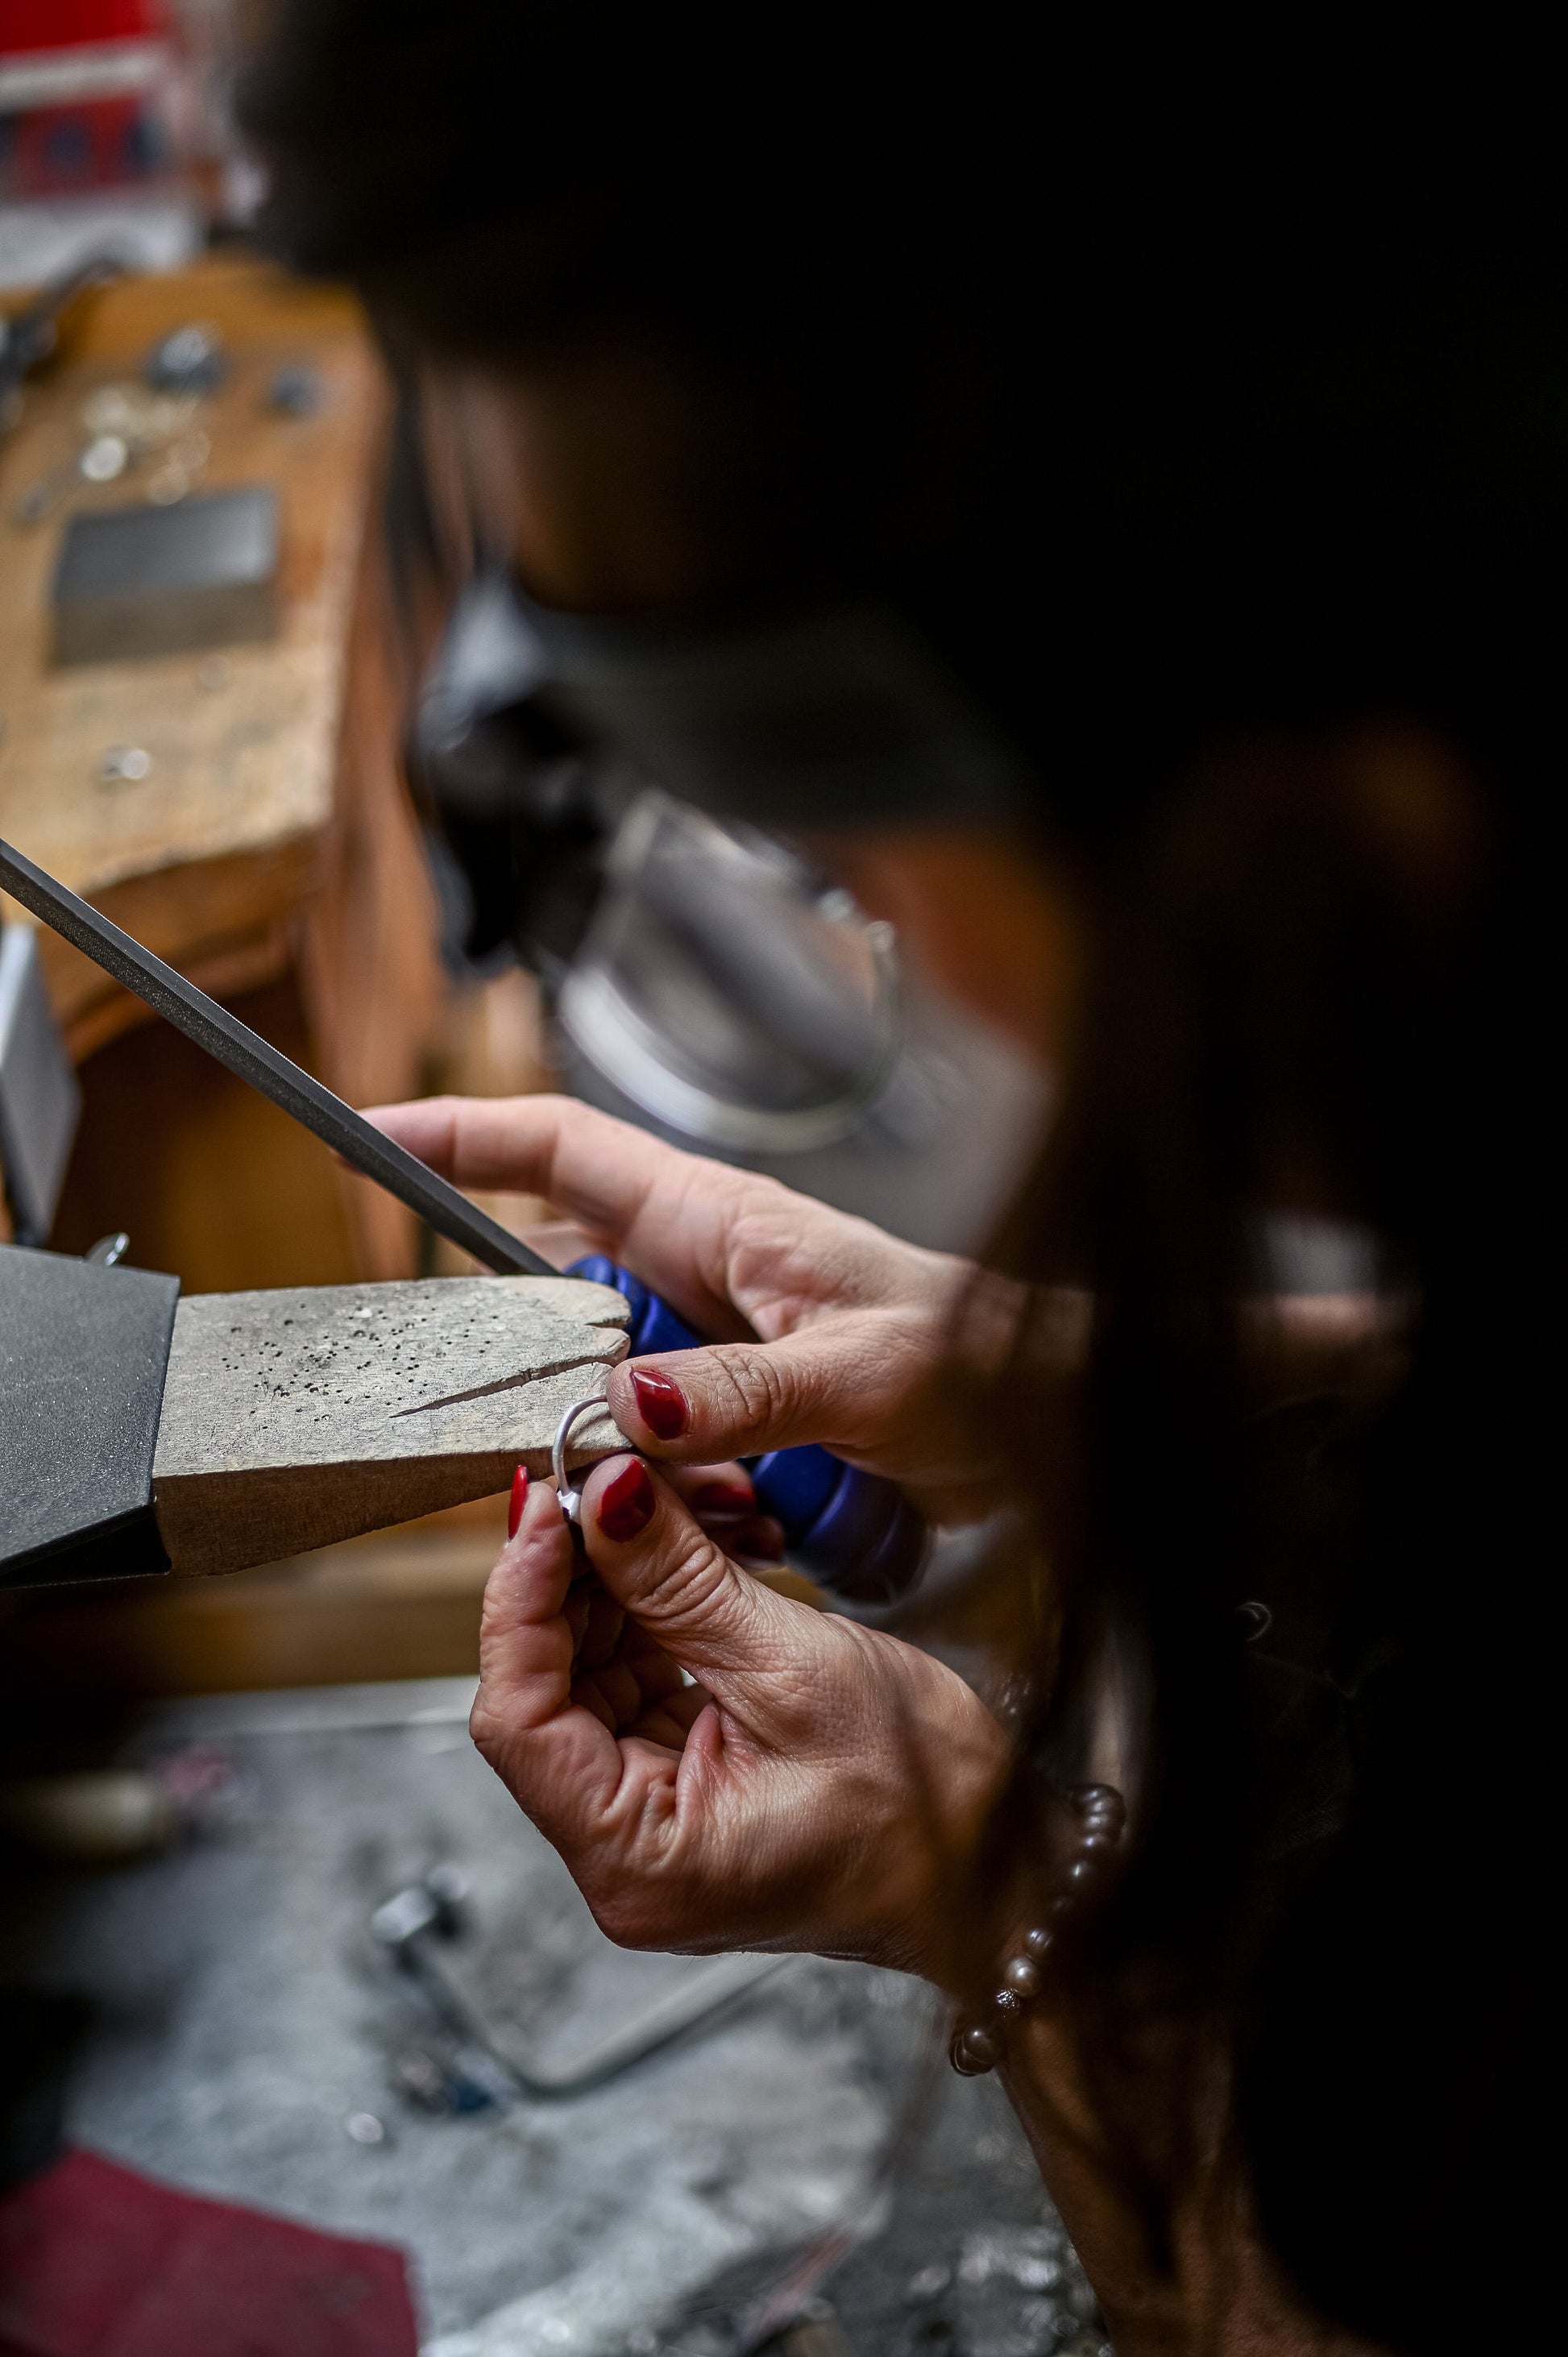 A woman is working on the Oregon Sunstone Milgrain Ring in Brushed Sterling Silver, creating exquisite handmade jewelry for Cassin Jewelry.